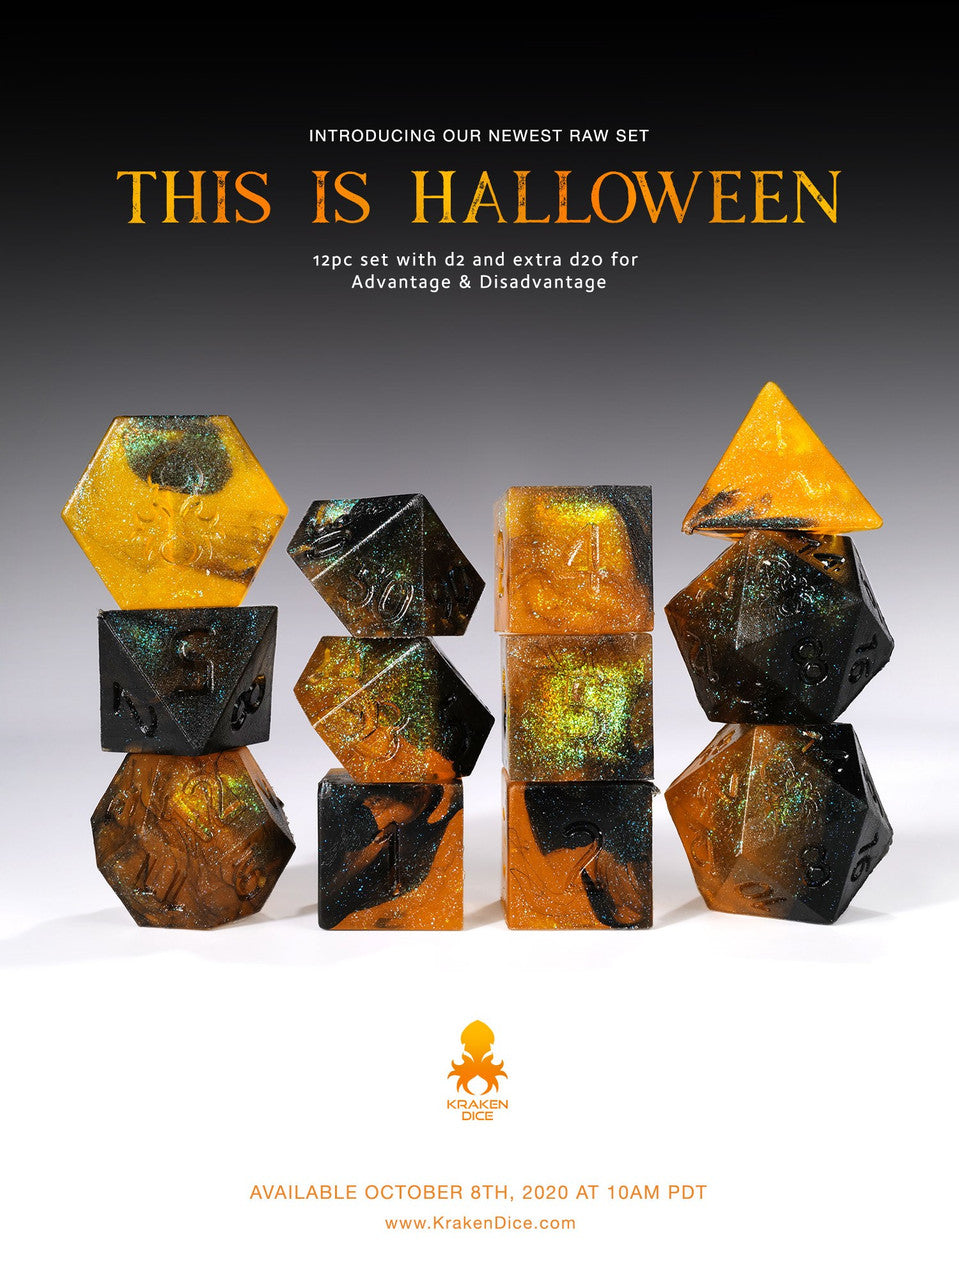 This is Halloween RAW 12pc Dice Set